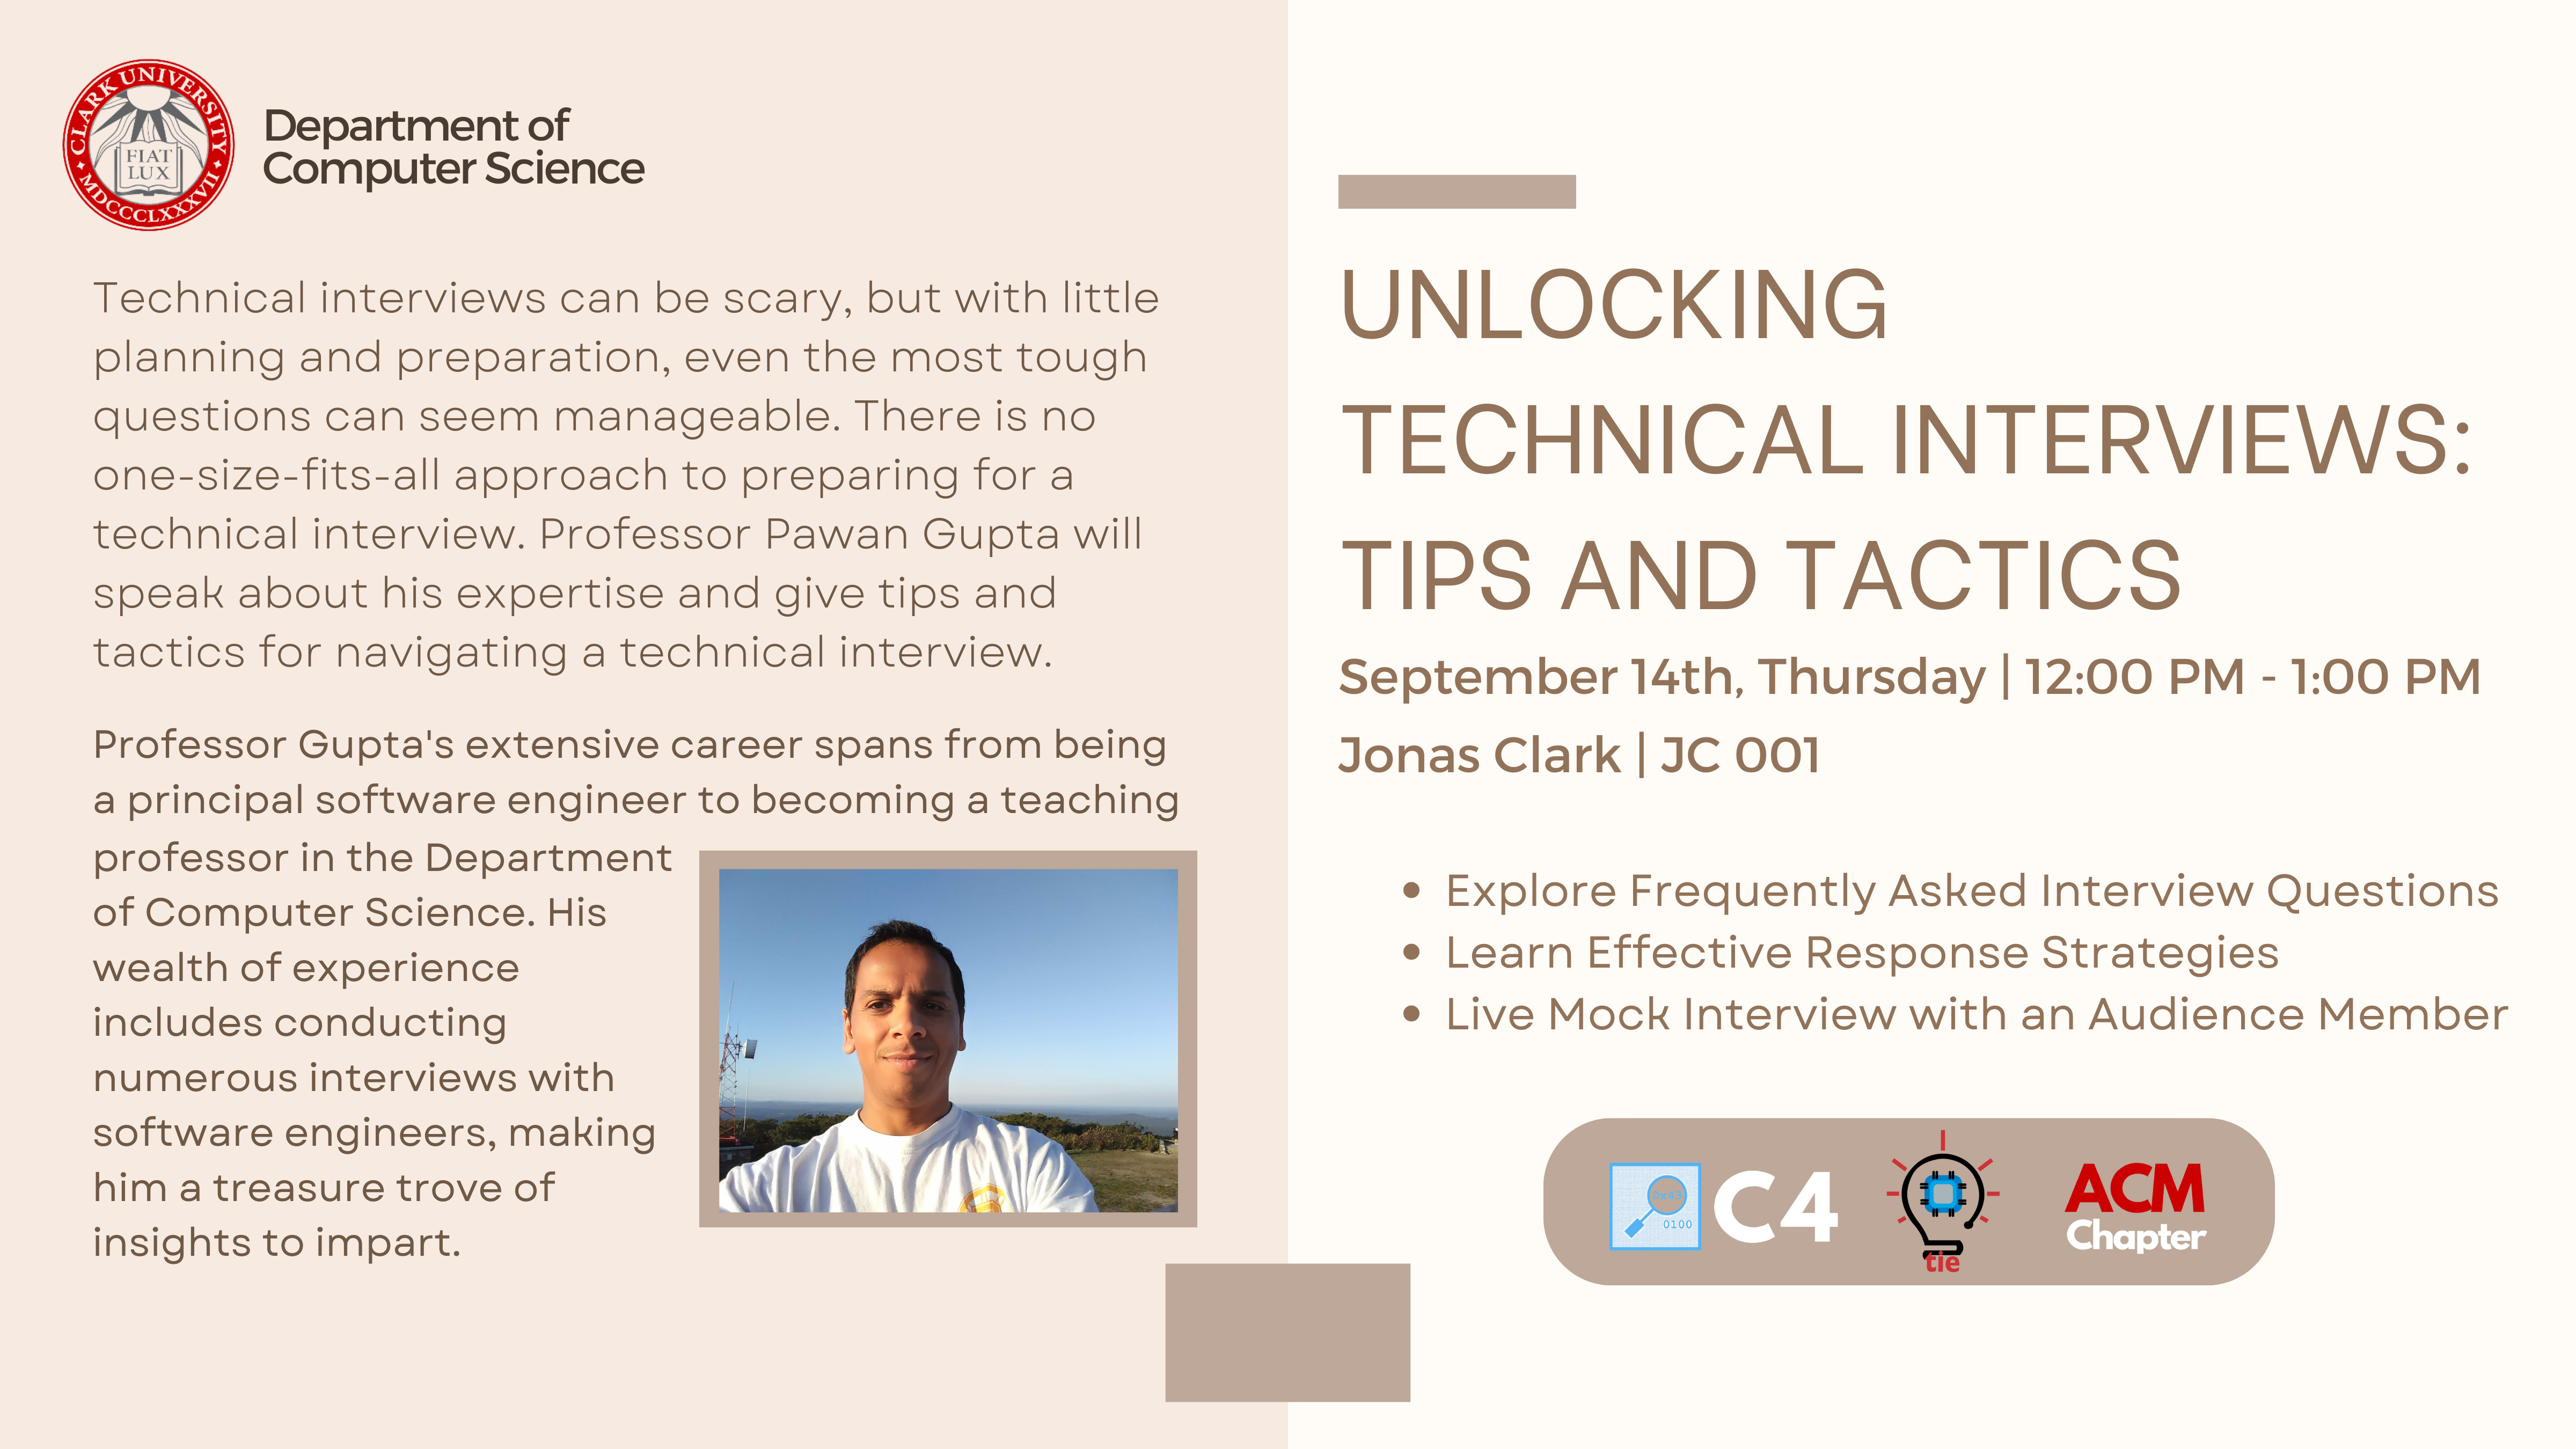 Flyer for a Computer Science event for preparing students for technical interviews on 09/14 in JC 001 at 12 PM